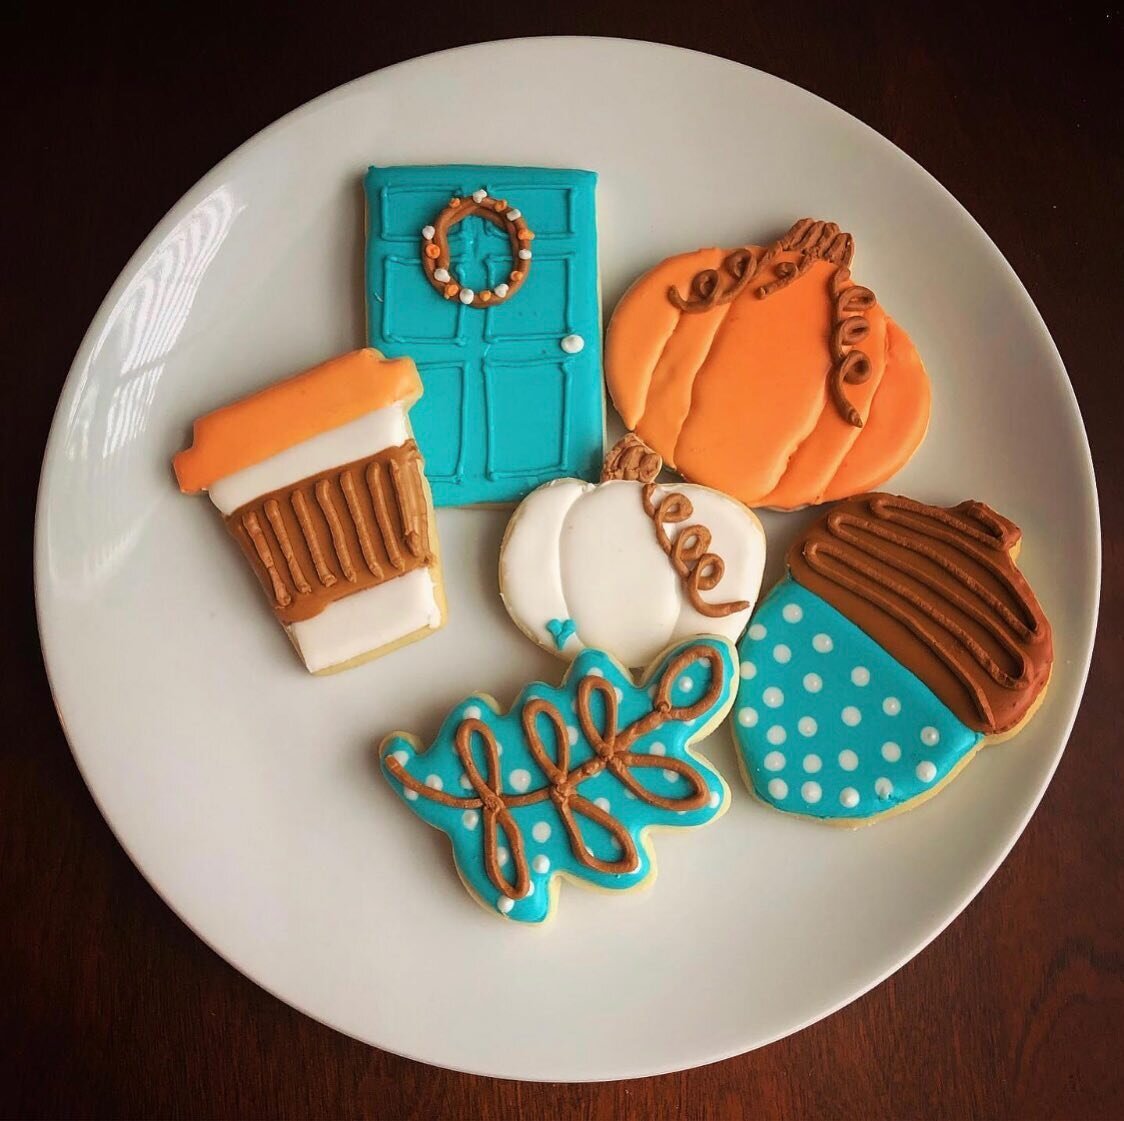 About one year ago I walked into my very first cookie decorating class with @gartygoodies and created this fall set.
Funny how I went into it thinking &ldquo;oh boy, let&rsquo;s not mess this up too much&rdquo; to 1 year later, rocking a cookie busin